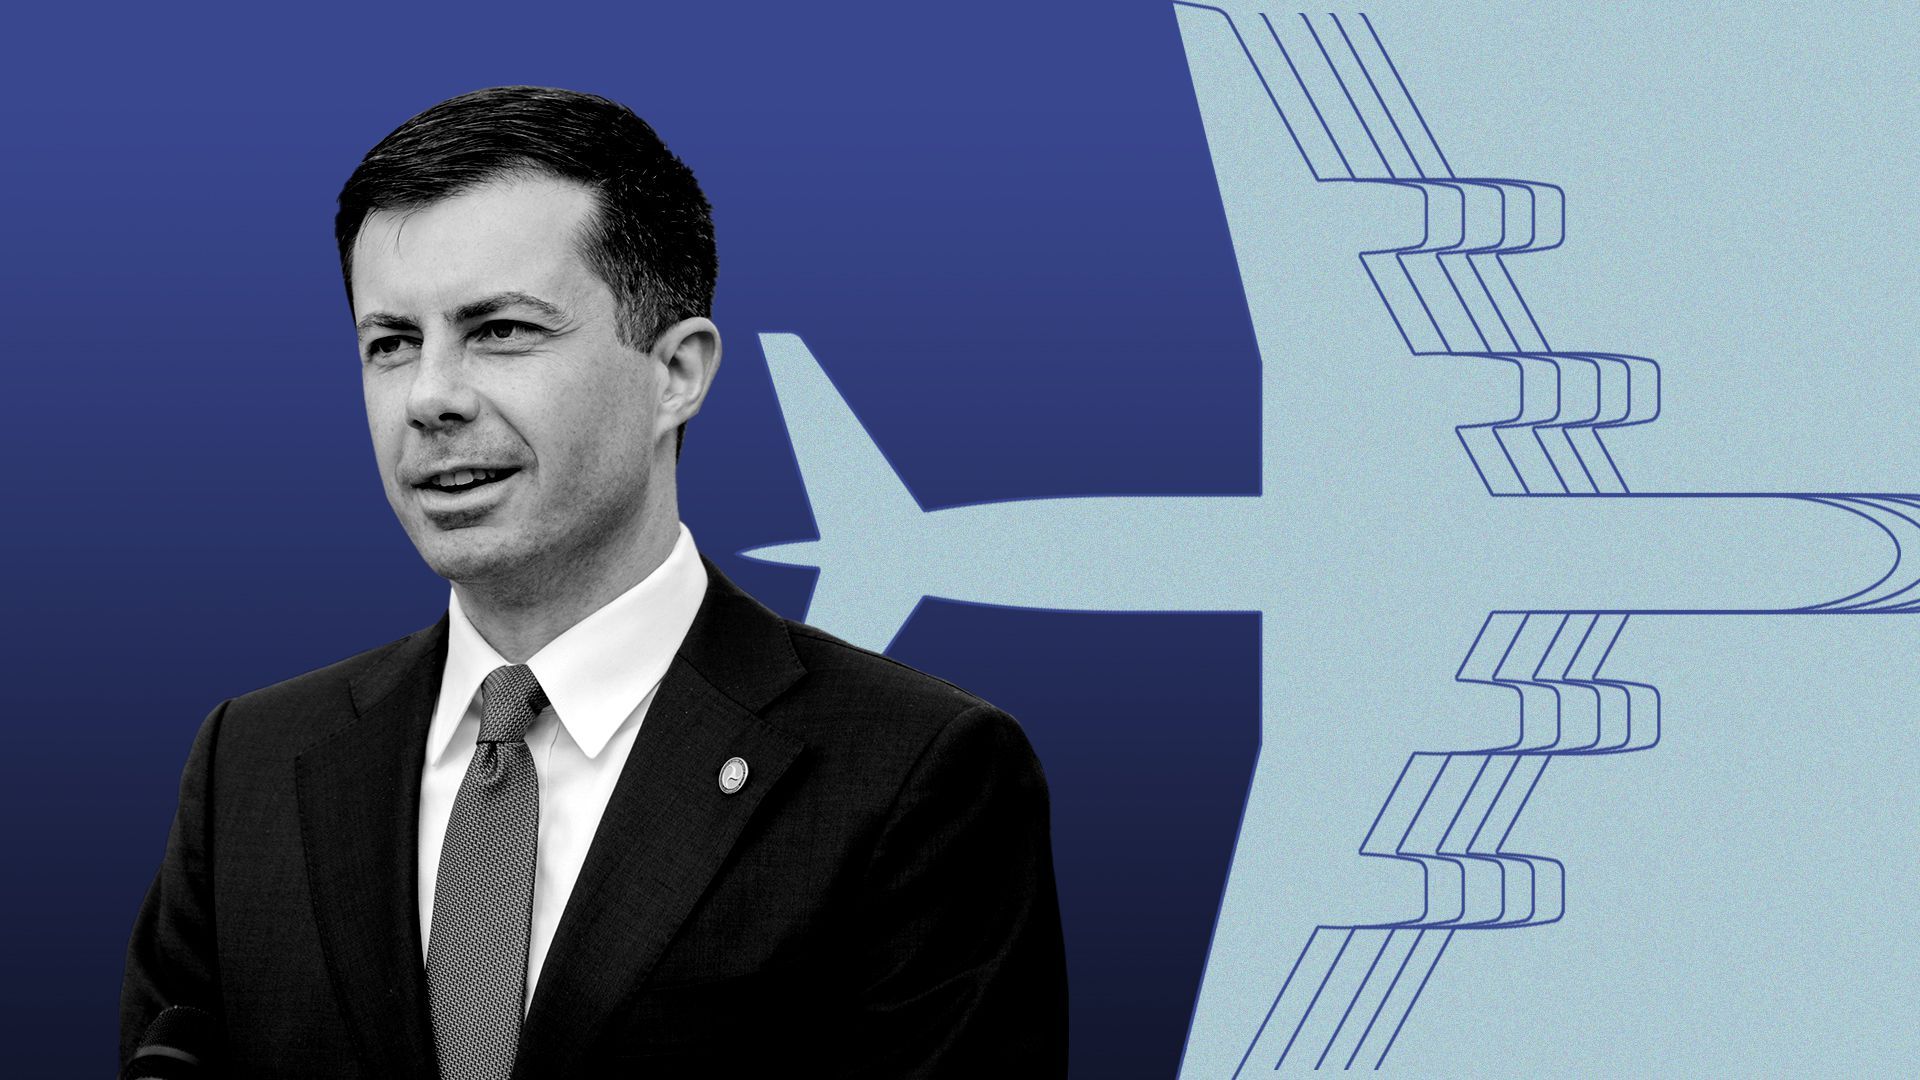 Photo illustration of Pete Buttigieg and a graphic of airplanes